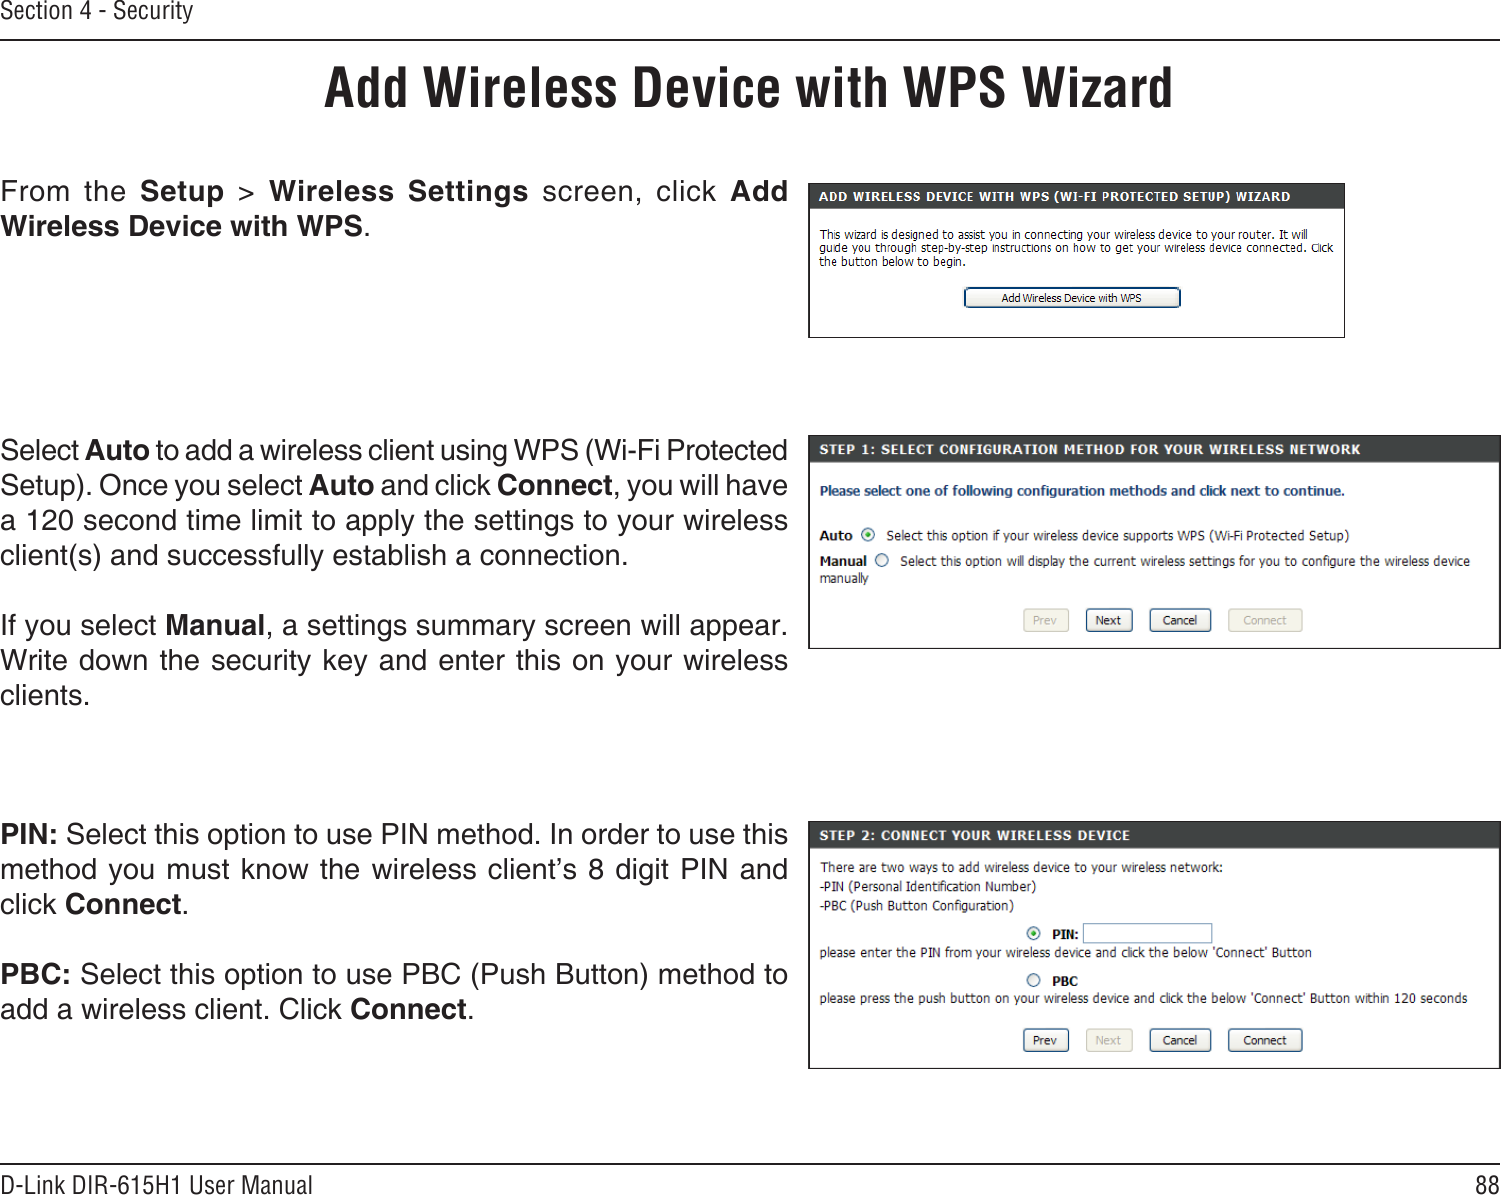 88D-Link DIR-615H1 User ManualSection 4 - SecurityFrom  the  Setup  &gt;  Wireless  Settings  screen,  click  Add Wireless Device with WPS.Add Wireless Device with WPS WizardPIN: Select this option to use PIN method. In order to use this method you must know the wireless client’s 8 digit PIN and click Connect.PBC: Select this option to use PBC (Push Button) method to add a wireless client. Click Connect.Select Auto to add a wireless client using WPS (Wi-Fi Protected Setup). Once you select Auto and click Connect, you will have a 120 second time limit to apply the settings to your wireless client(s) and successfully establish a connection. If you select Manual, a settings summary screen will appear. Write down the security key and enter this on your wireless clients. 